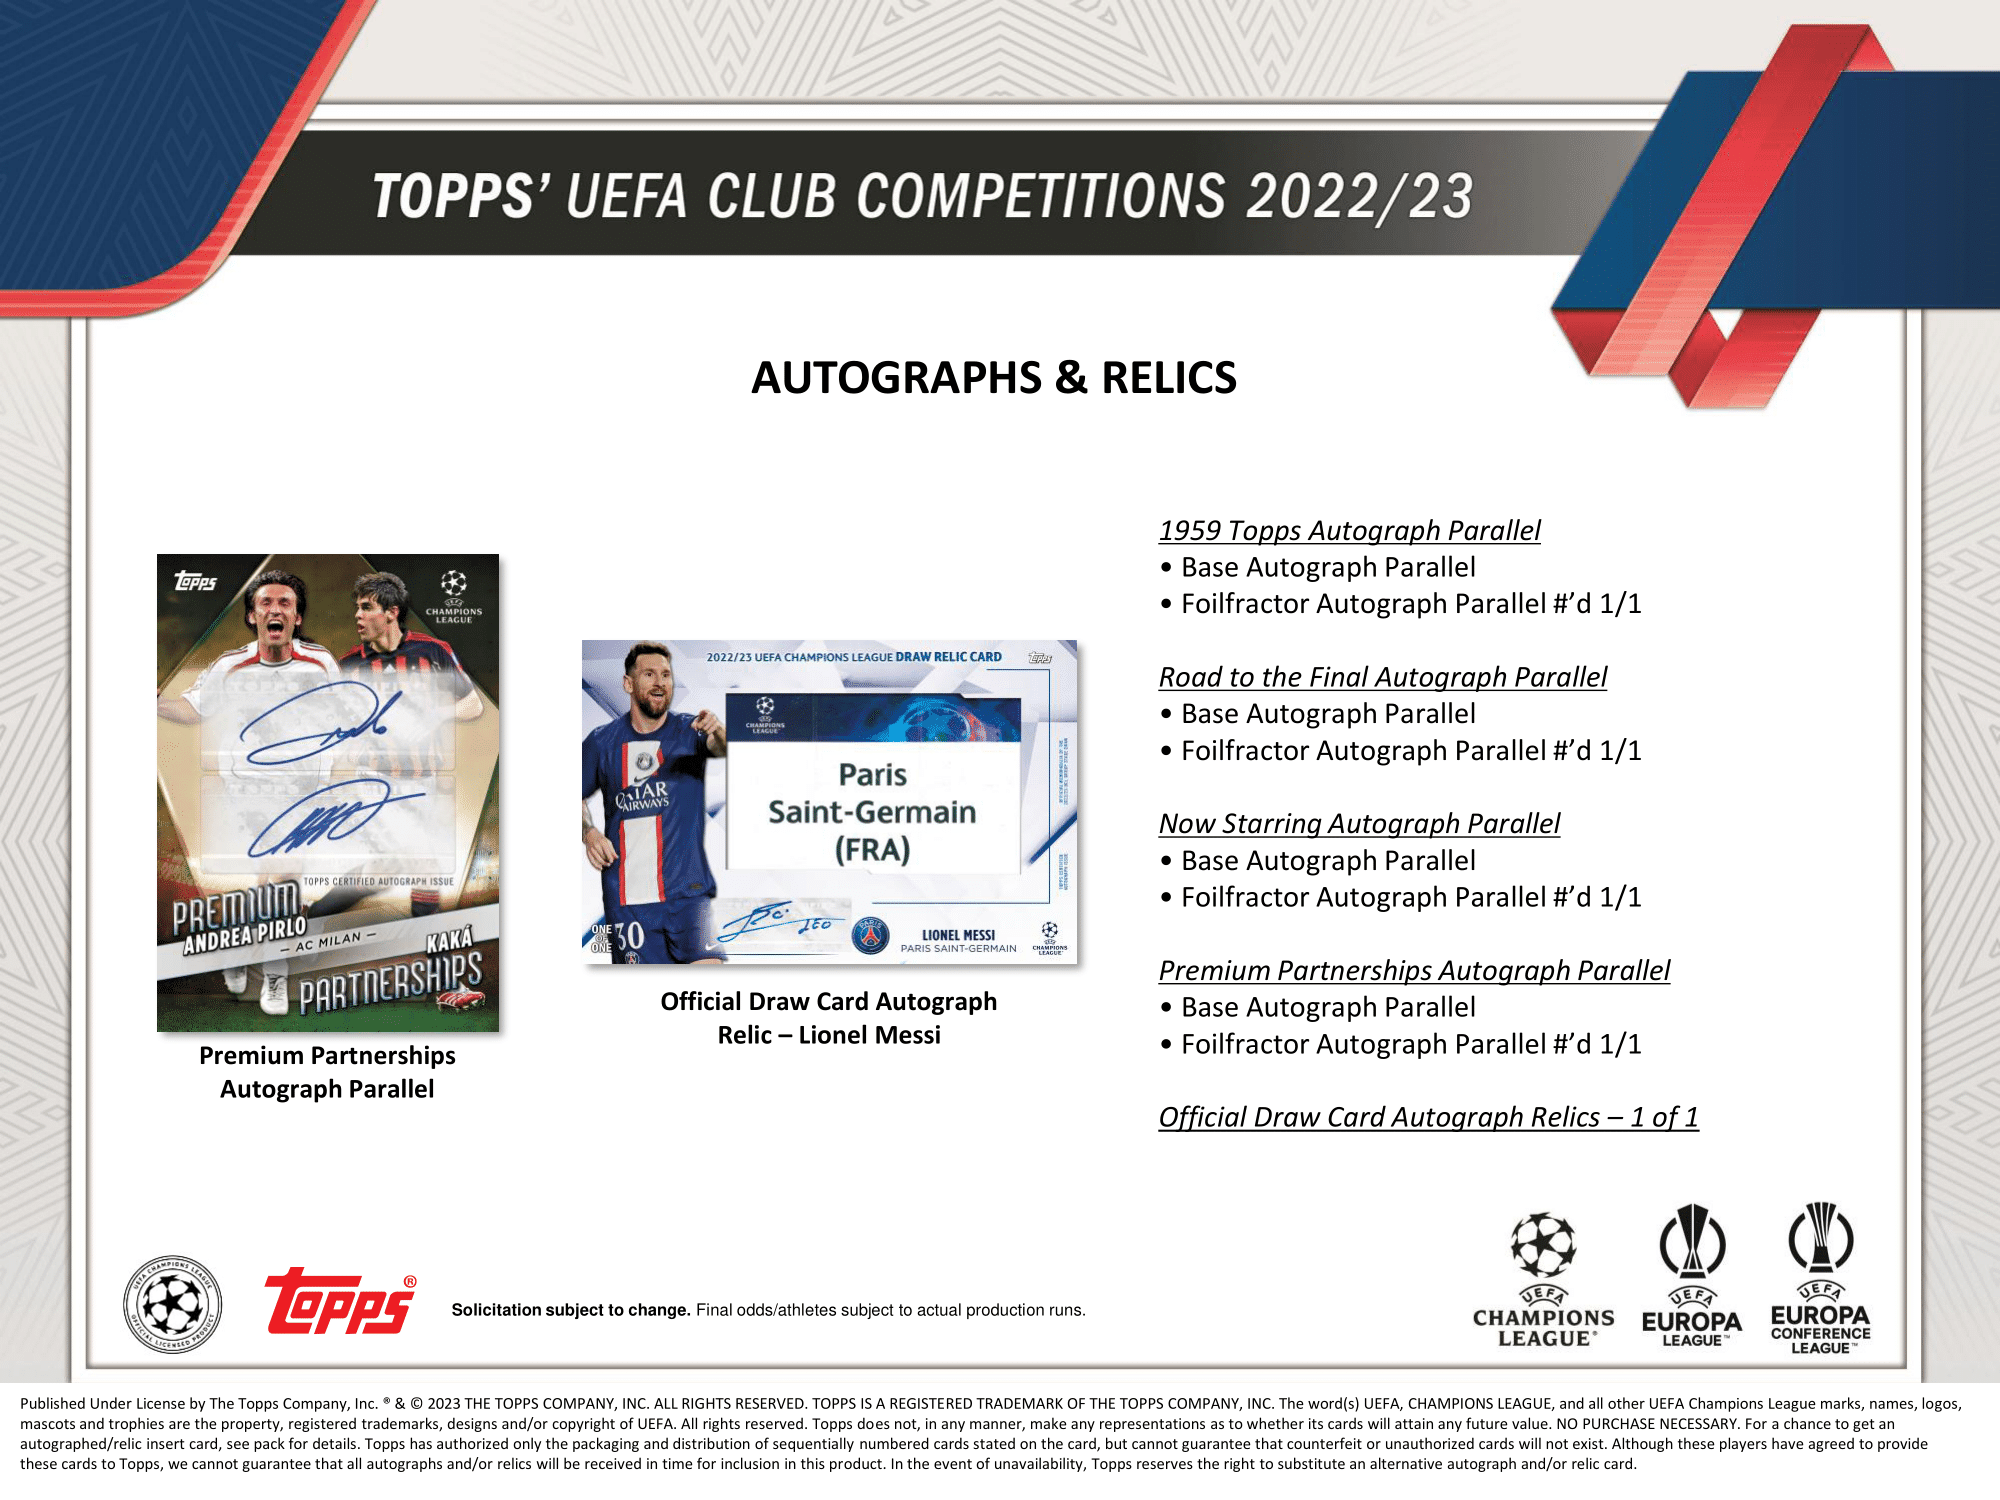 Topps - 2022/23 UEFA Club Competitions Football (Soccer) - Hobby Box - The Card Vault